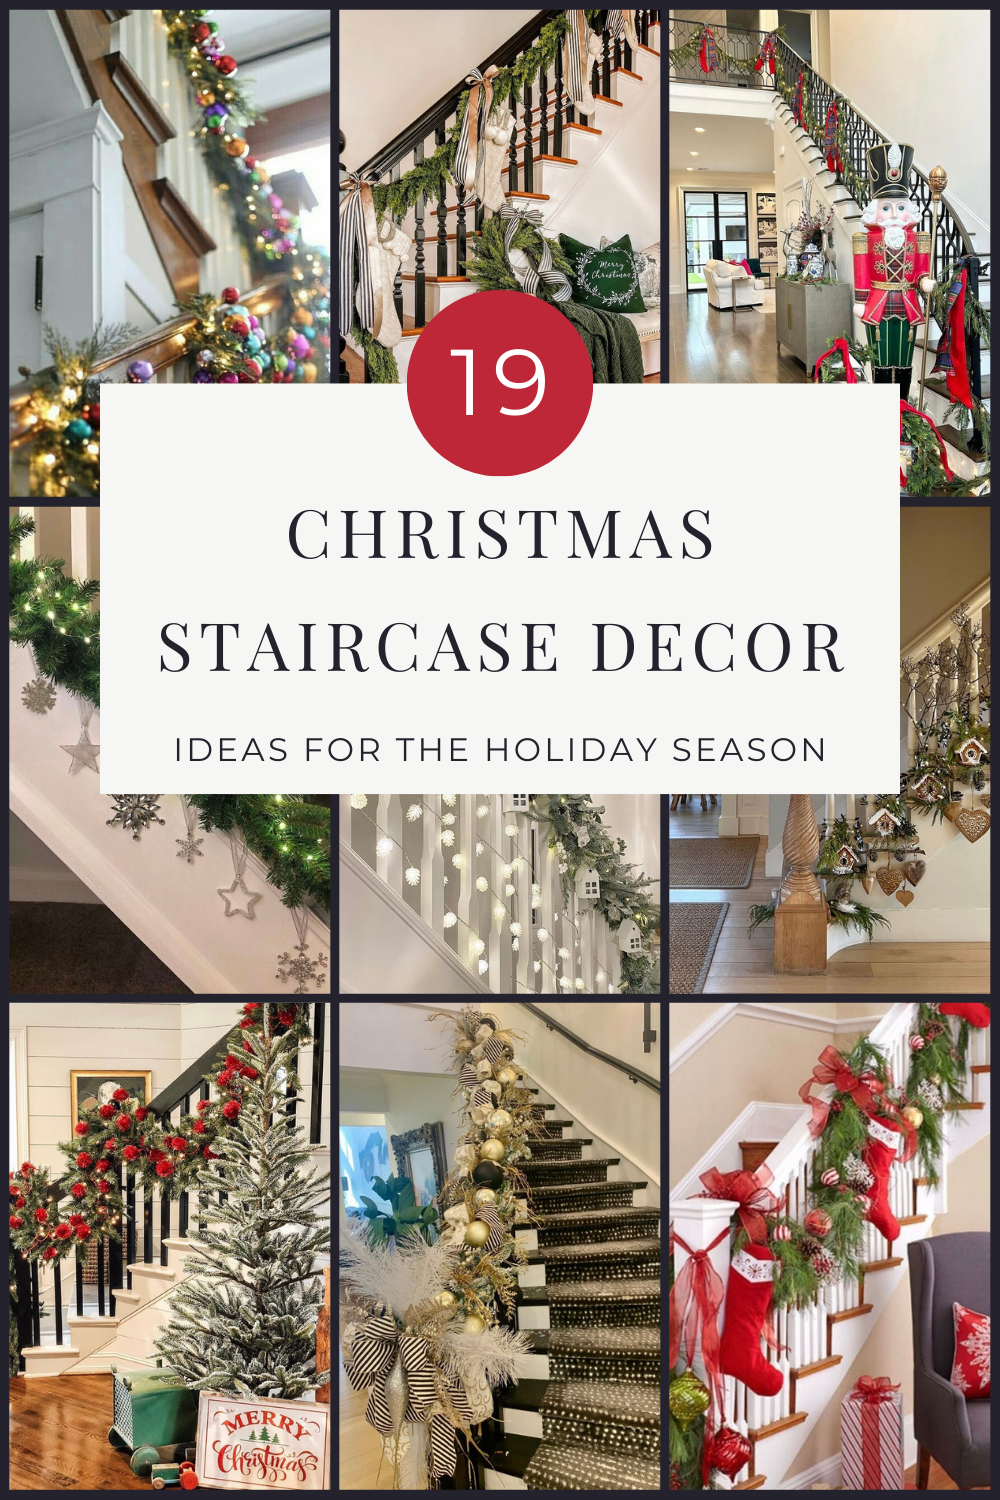 19 Christmas Staircase Decor Ideas for the Holiday Season | Finding Mandee